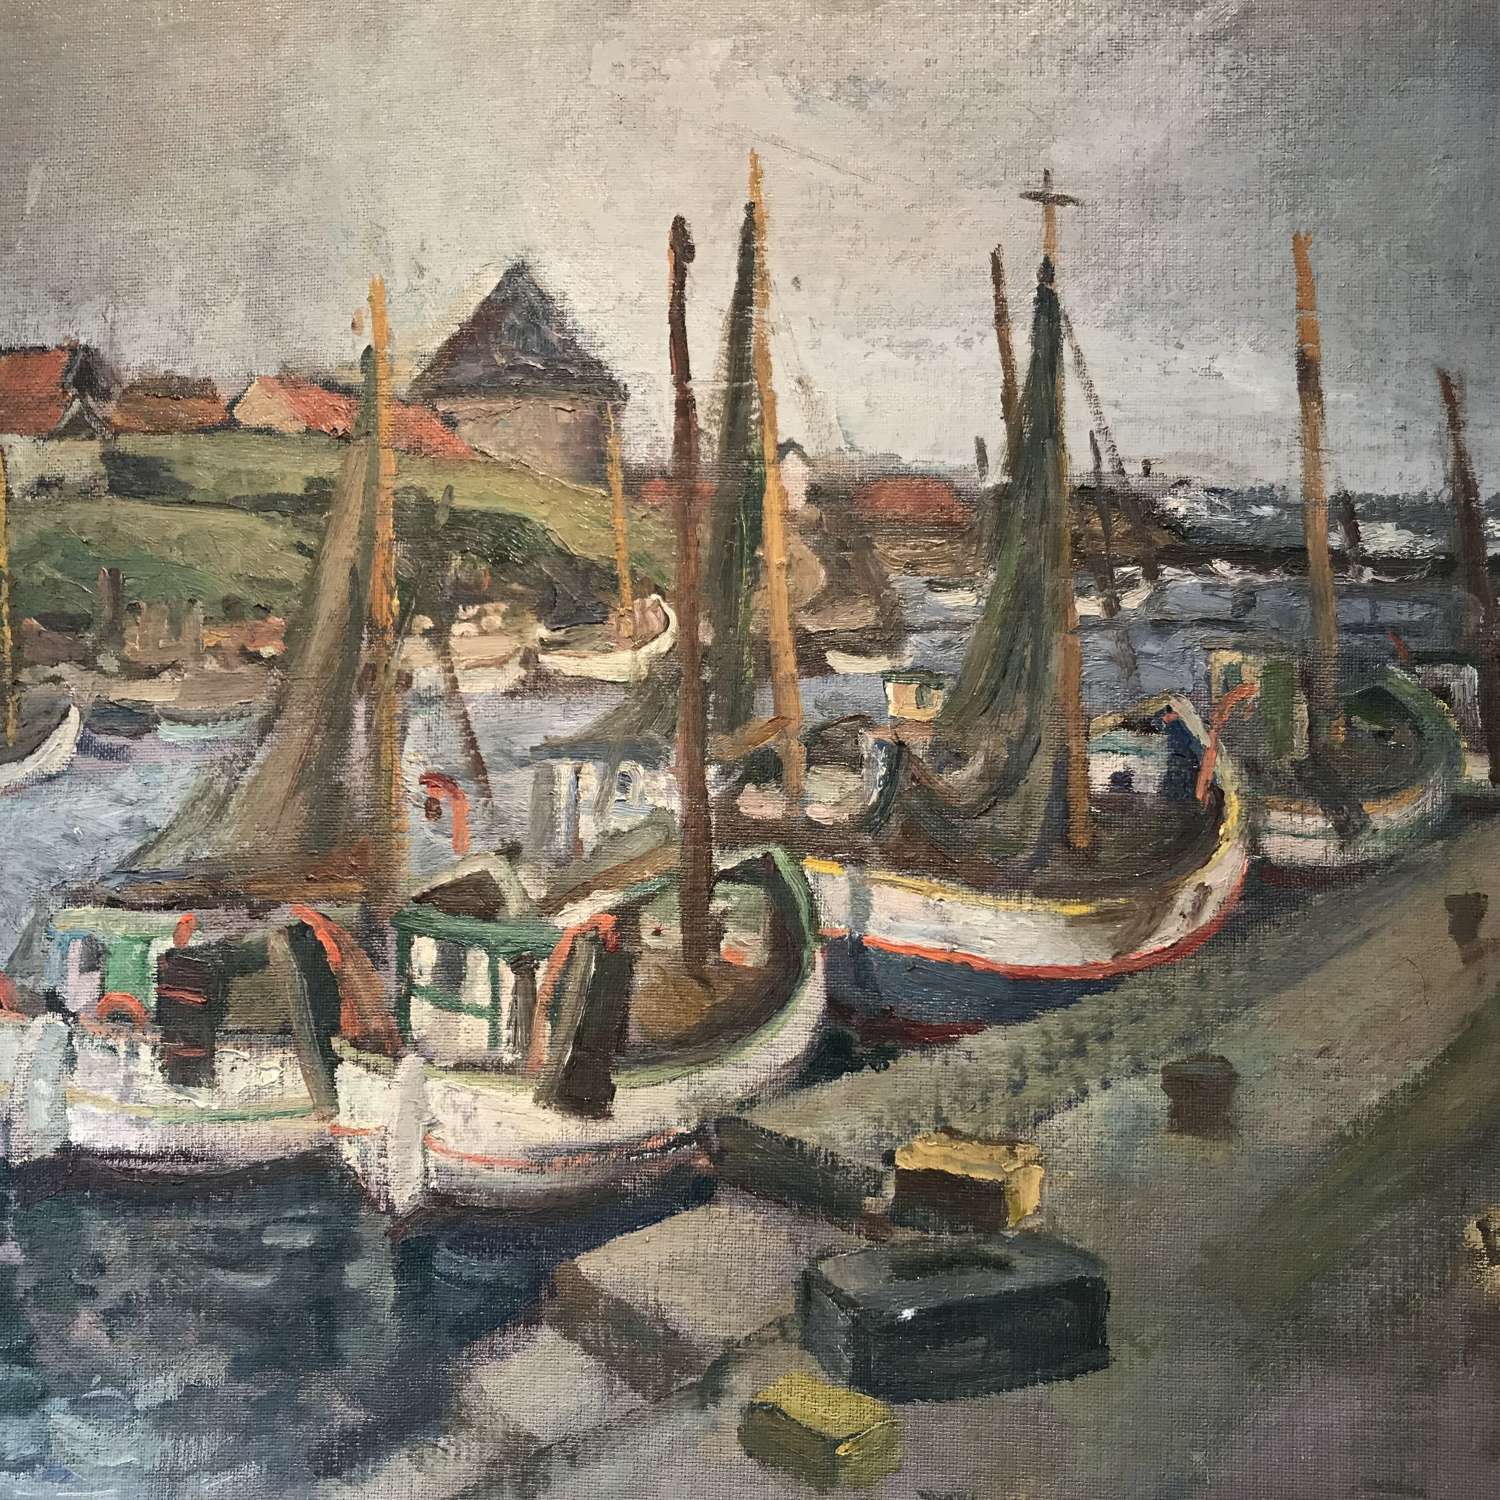 1938. Swedish fishing fleet in harbour by Iwar Donner